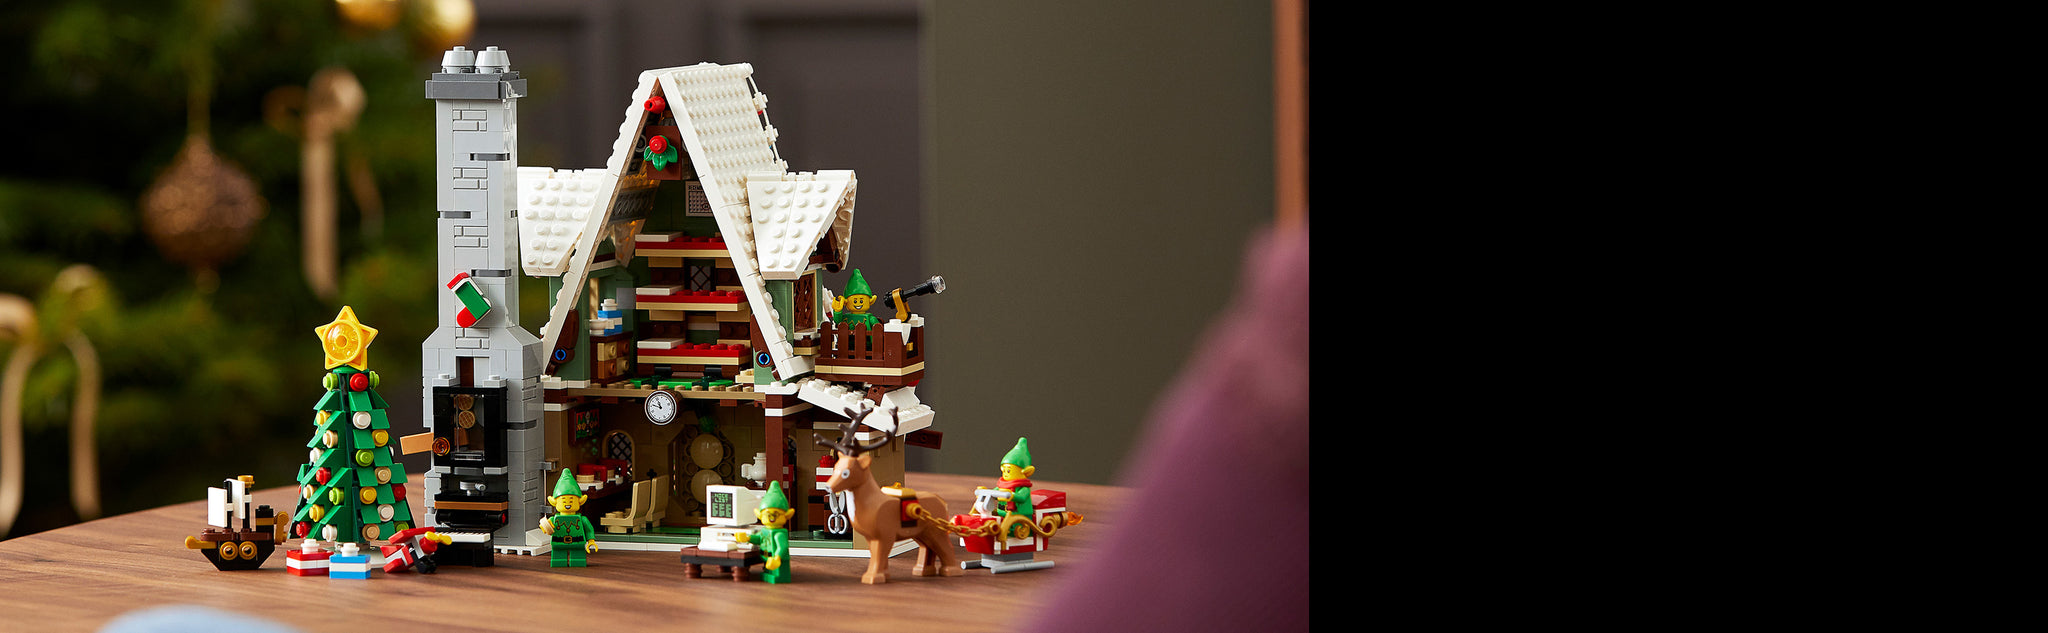 A cheerful Christmas creation Step into the world of the elves and experience the true Christmas feeling. This model building set with waffles, presents and sleigh rides is packed with your favorite Christmas traditions. You will find a Christmas tree full of decorations, various presents and a computer to keep track of who has been nice and naughty this year. With the telescope, the elves can watch Santa Claus take off in his sleigh. A Christmas project just for you This Elf Clubhouse is part of a range of LEGO model building sets for adults who love ingenious designs and detailed scenes. The model is of course also a great Christmas gift for a loved one.